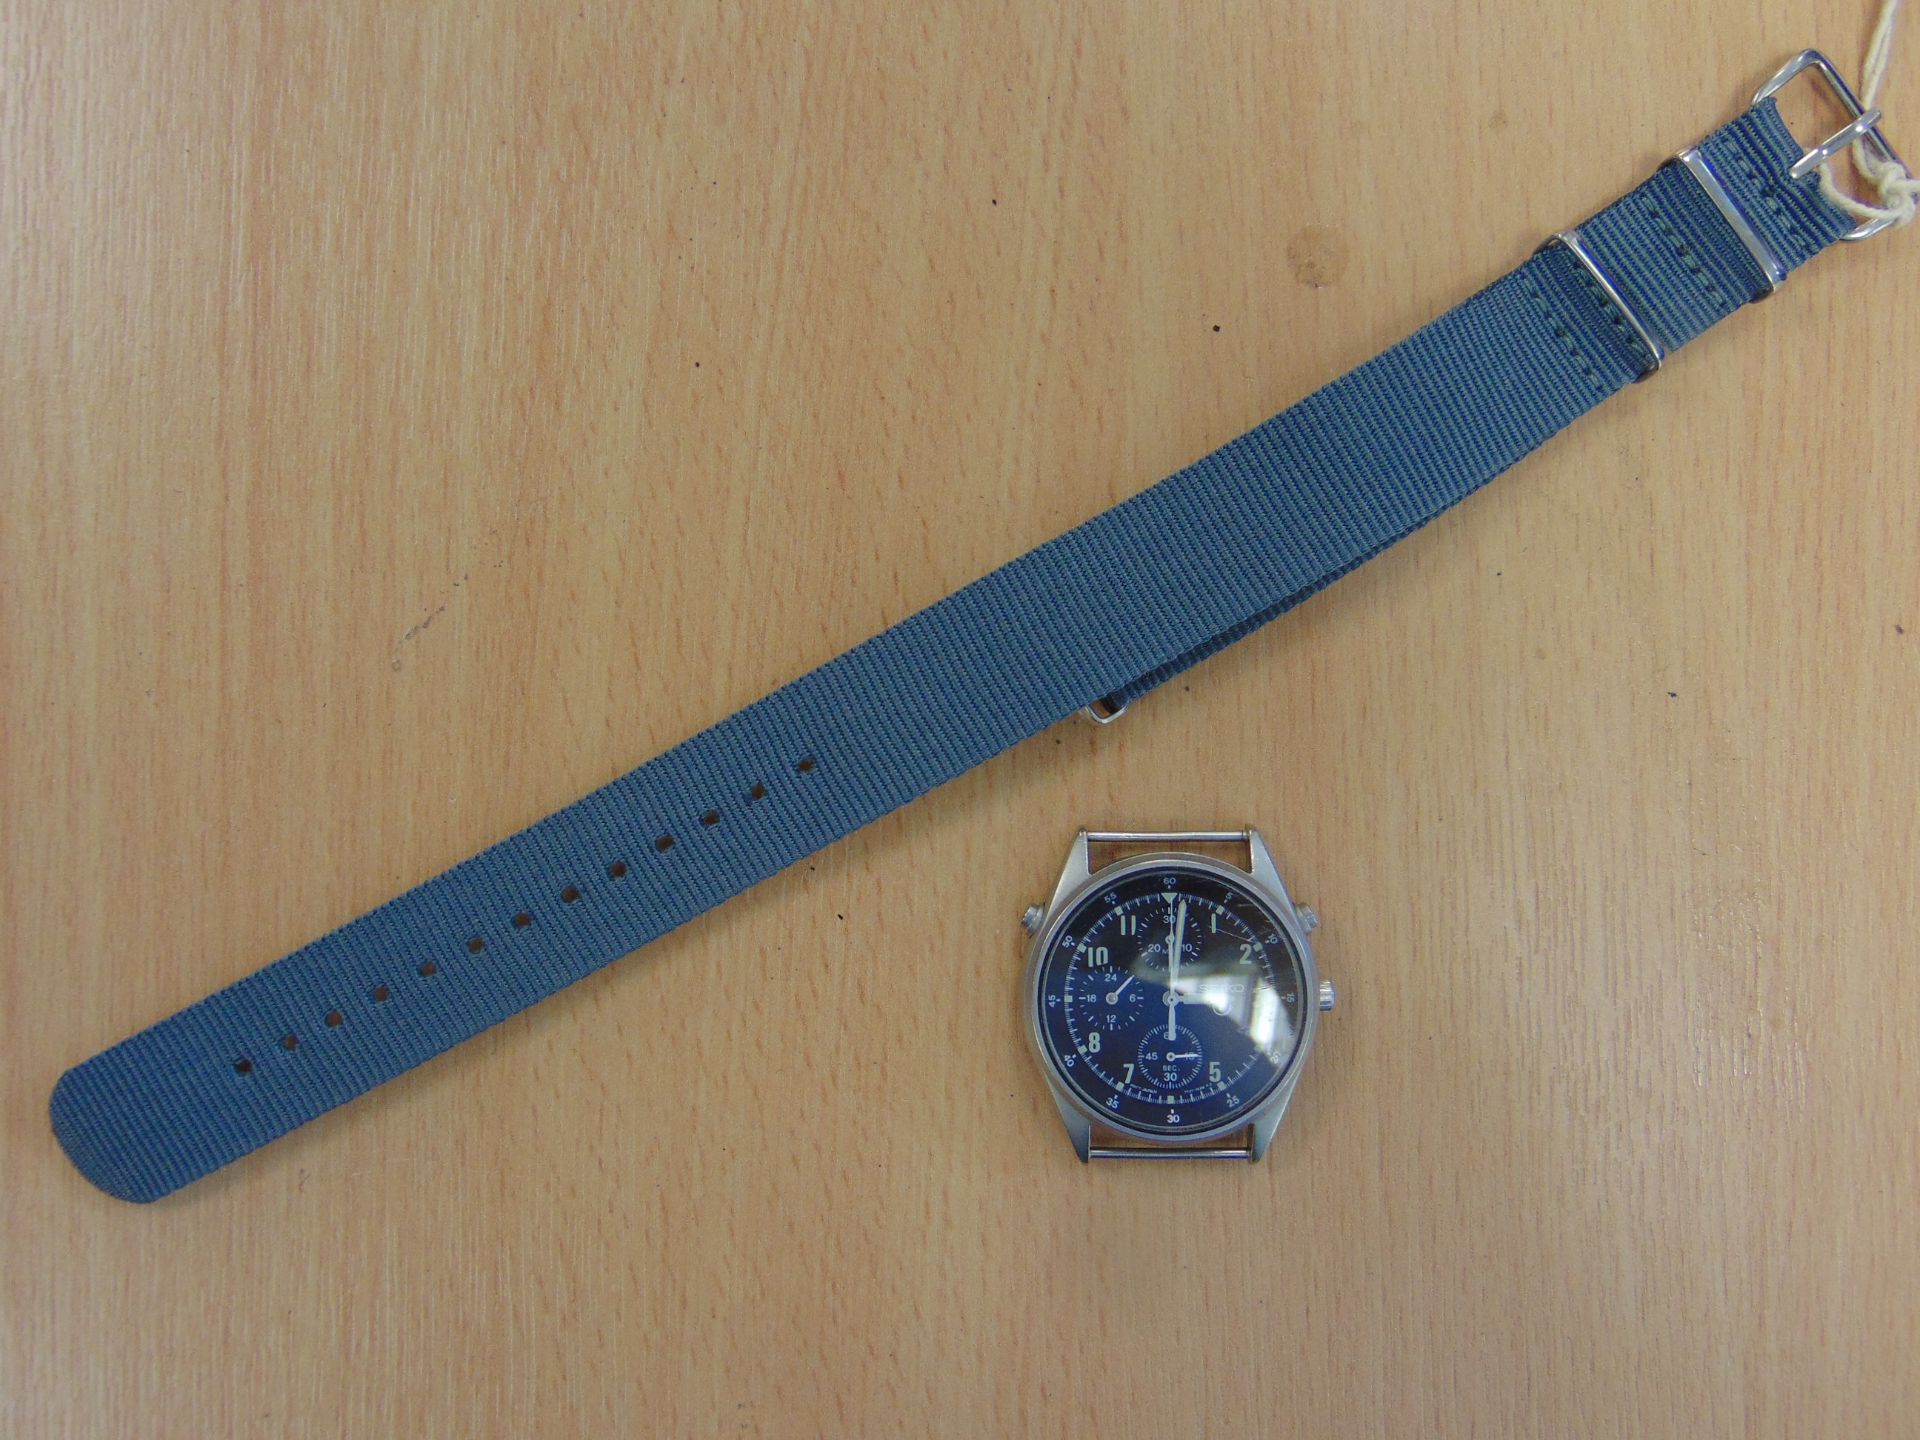 SEIKO GEN 2 RAF ISSUE PILOTS CHRONO WATCH NATO MARKINGS DATED 1995 - Image 10 of 10